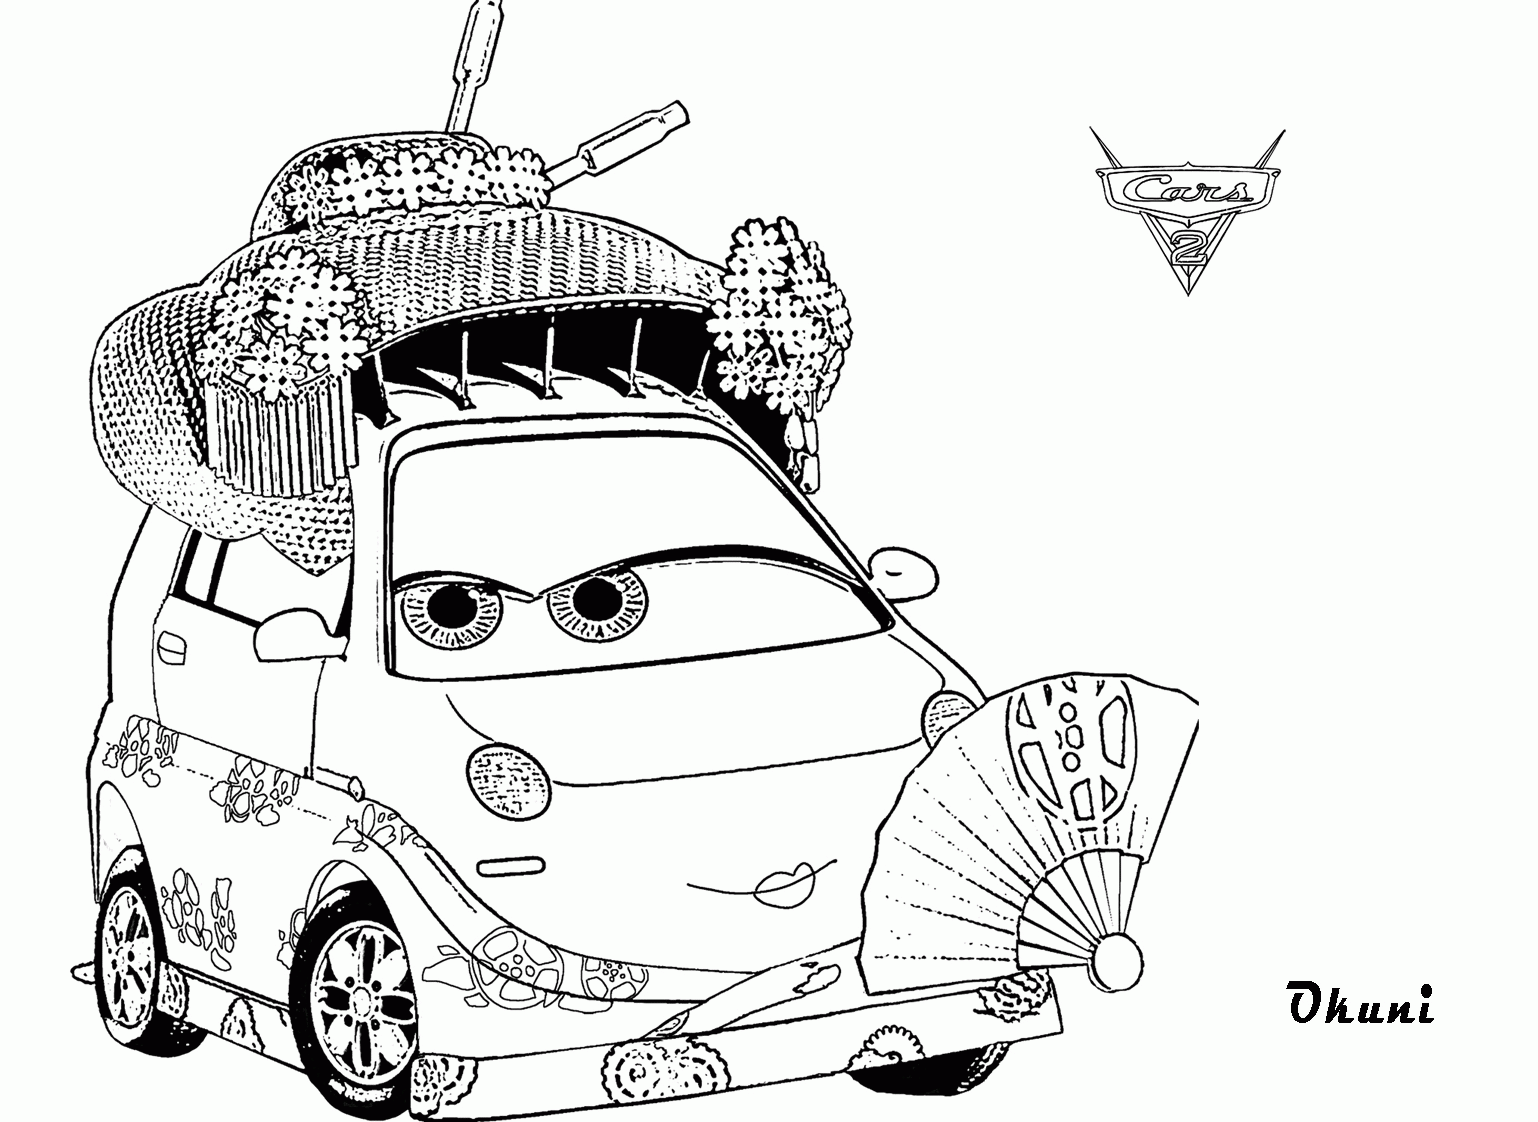 Okuni Coloring Pages For Kids Cars 2 | Cartoon Coloring pages of ...